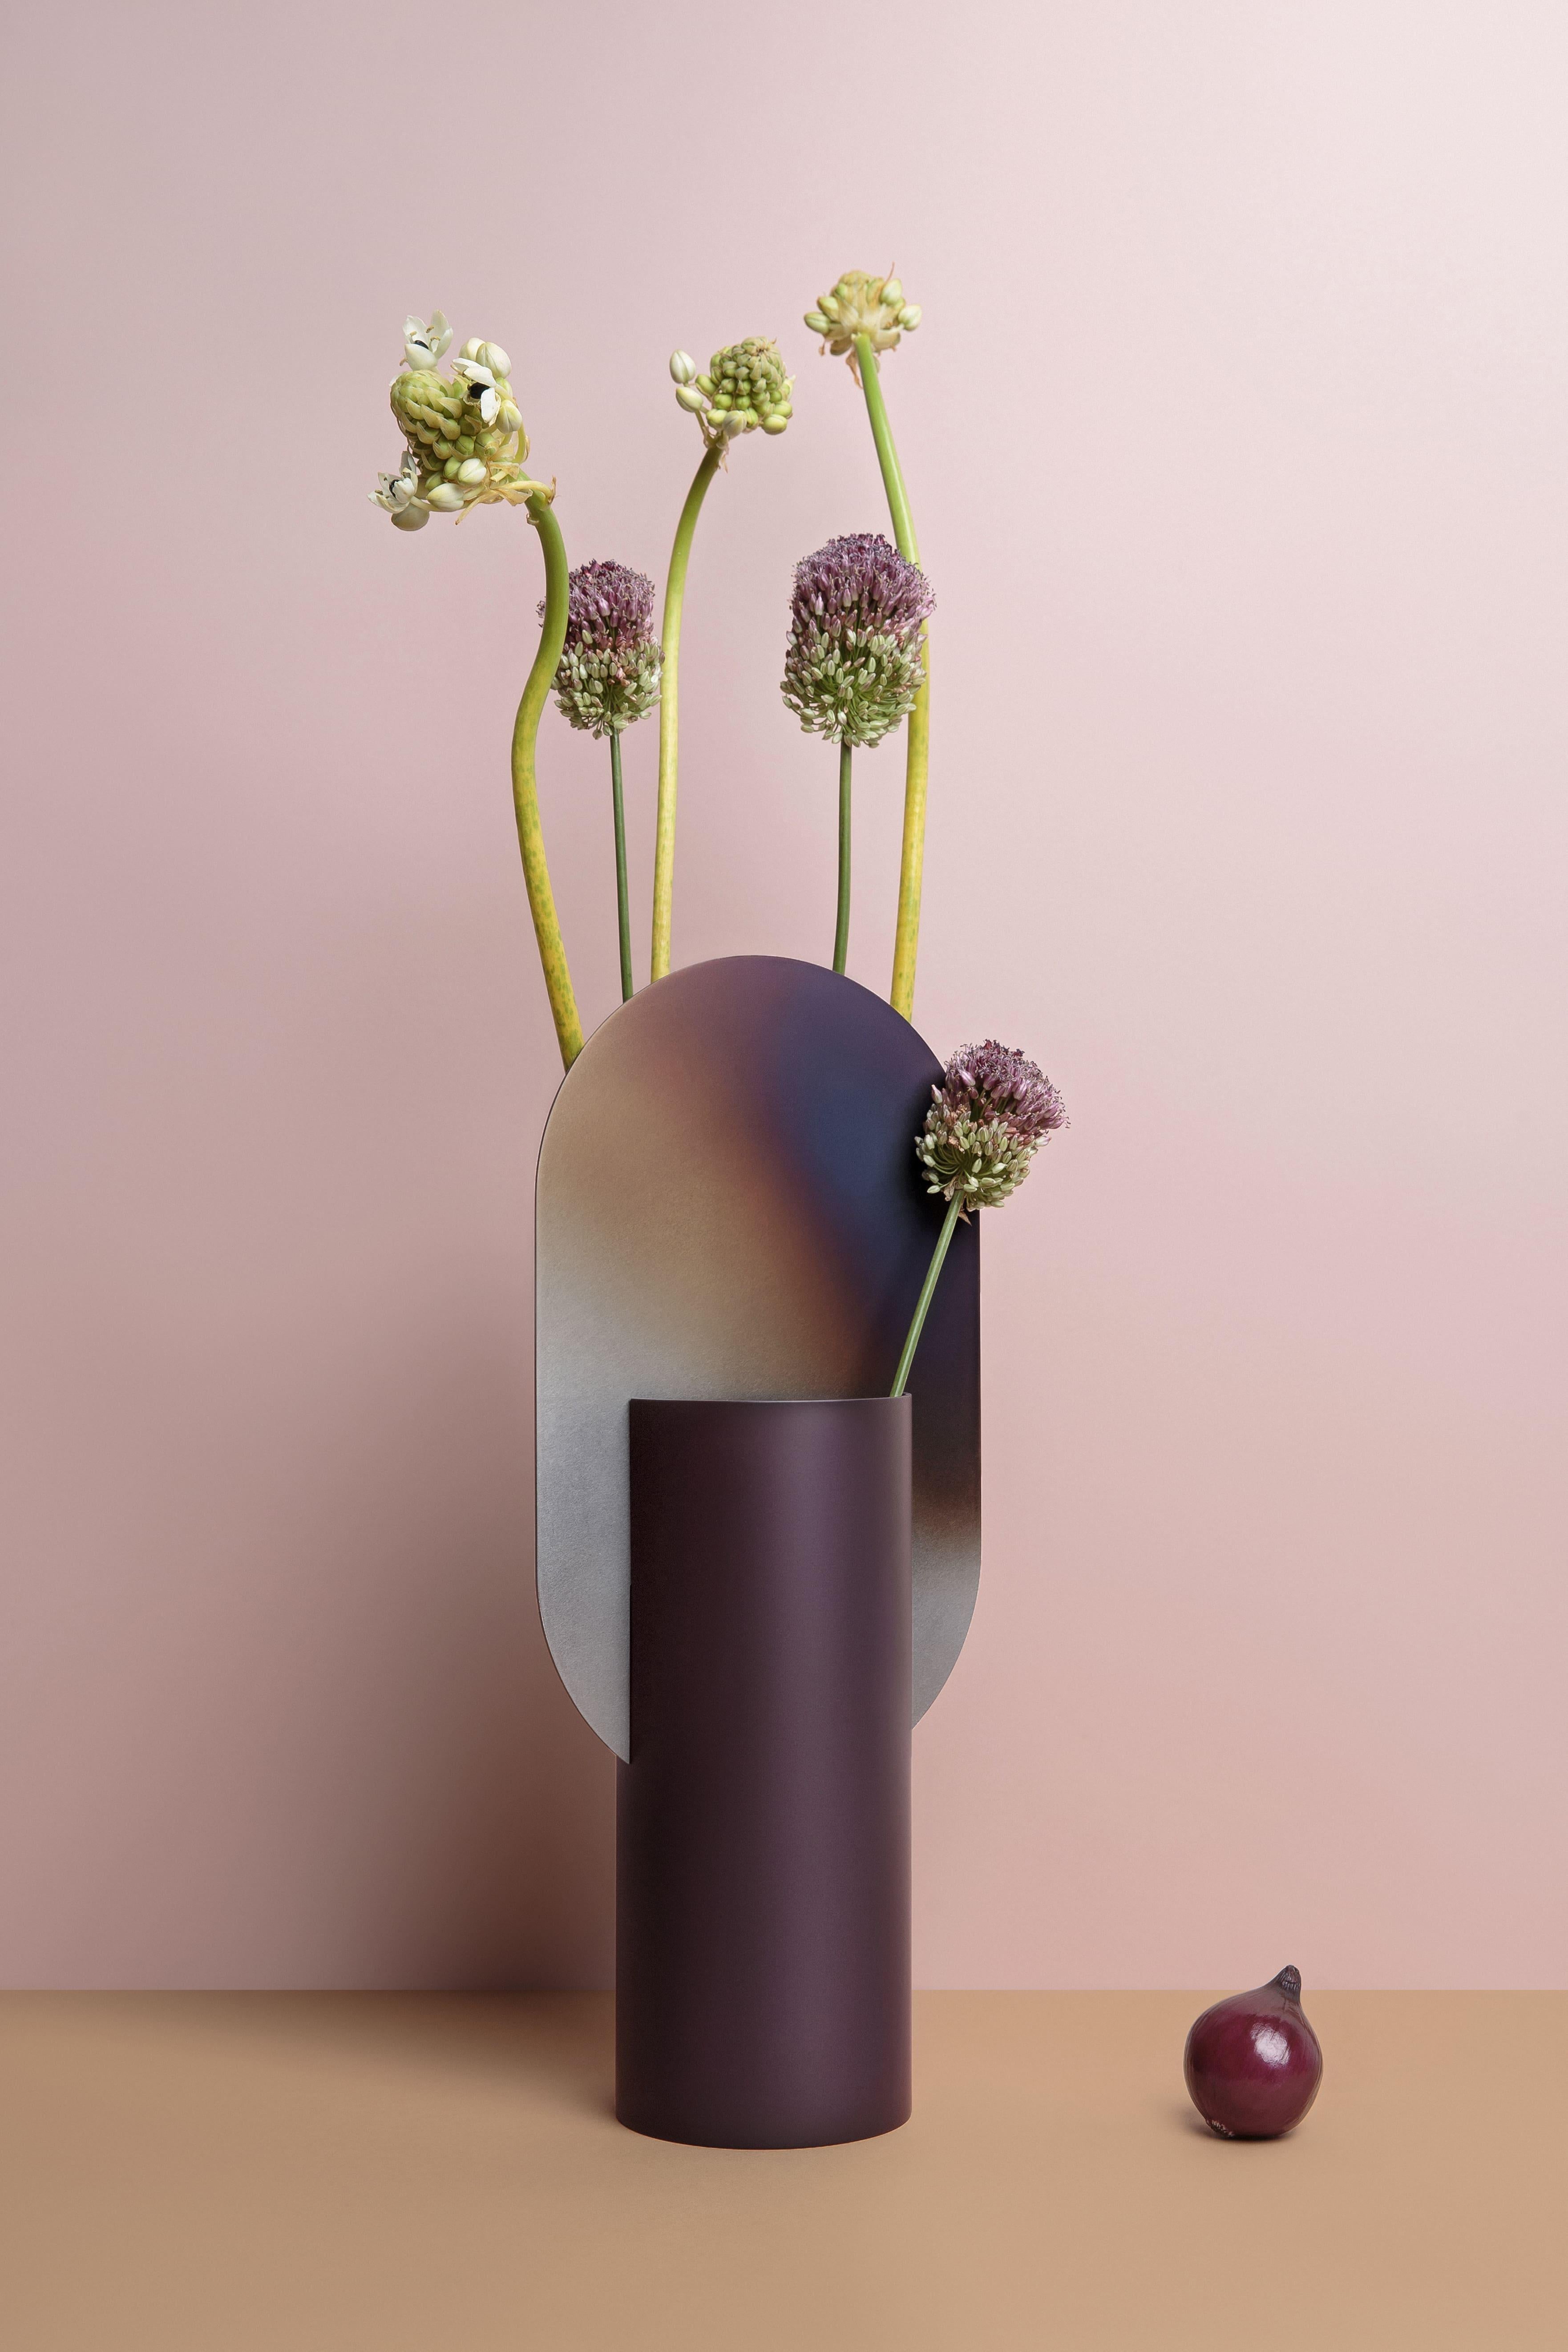 Genke vase by NOOM
Dimensions: H 38 cm x W 17 cm x D 10 cm
Materials: Burned steel, painted steel

NOOM is a young rapidly growing design company from Ukraine that produces lighting, decor and home accessories. 
We create timeless design